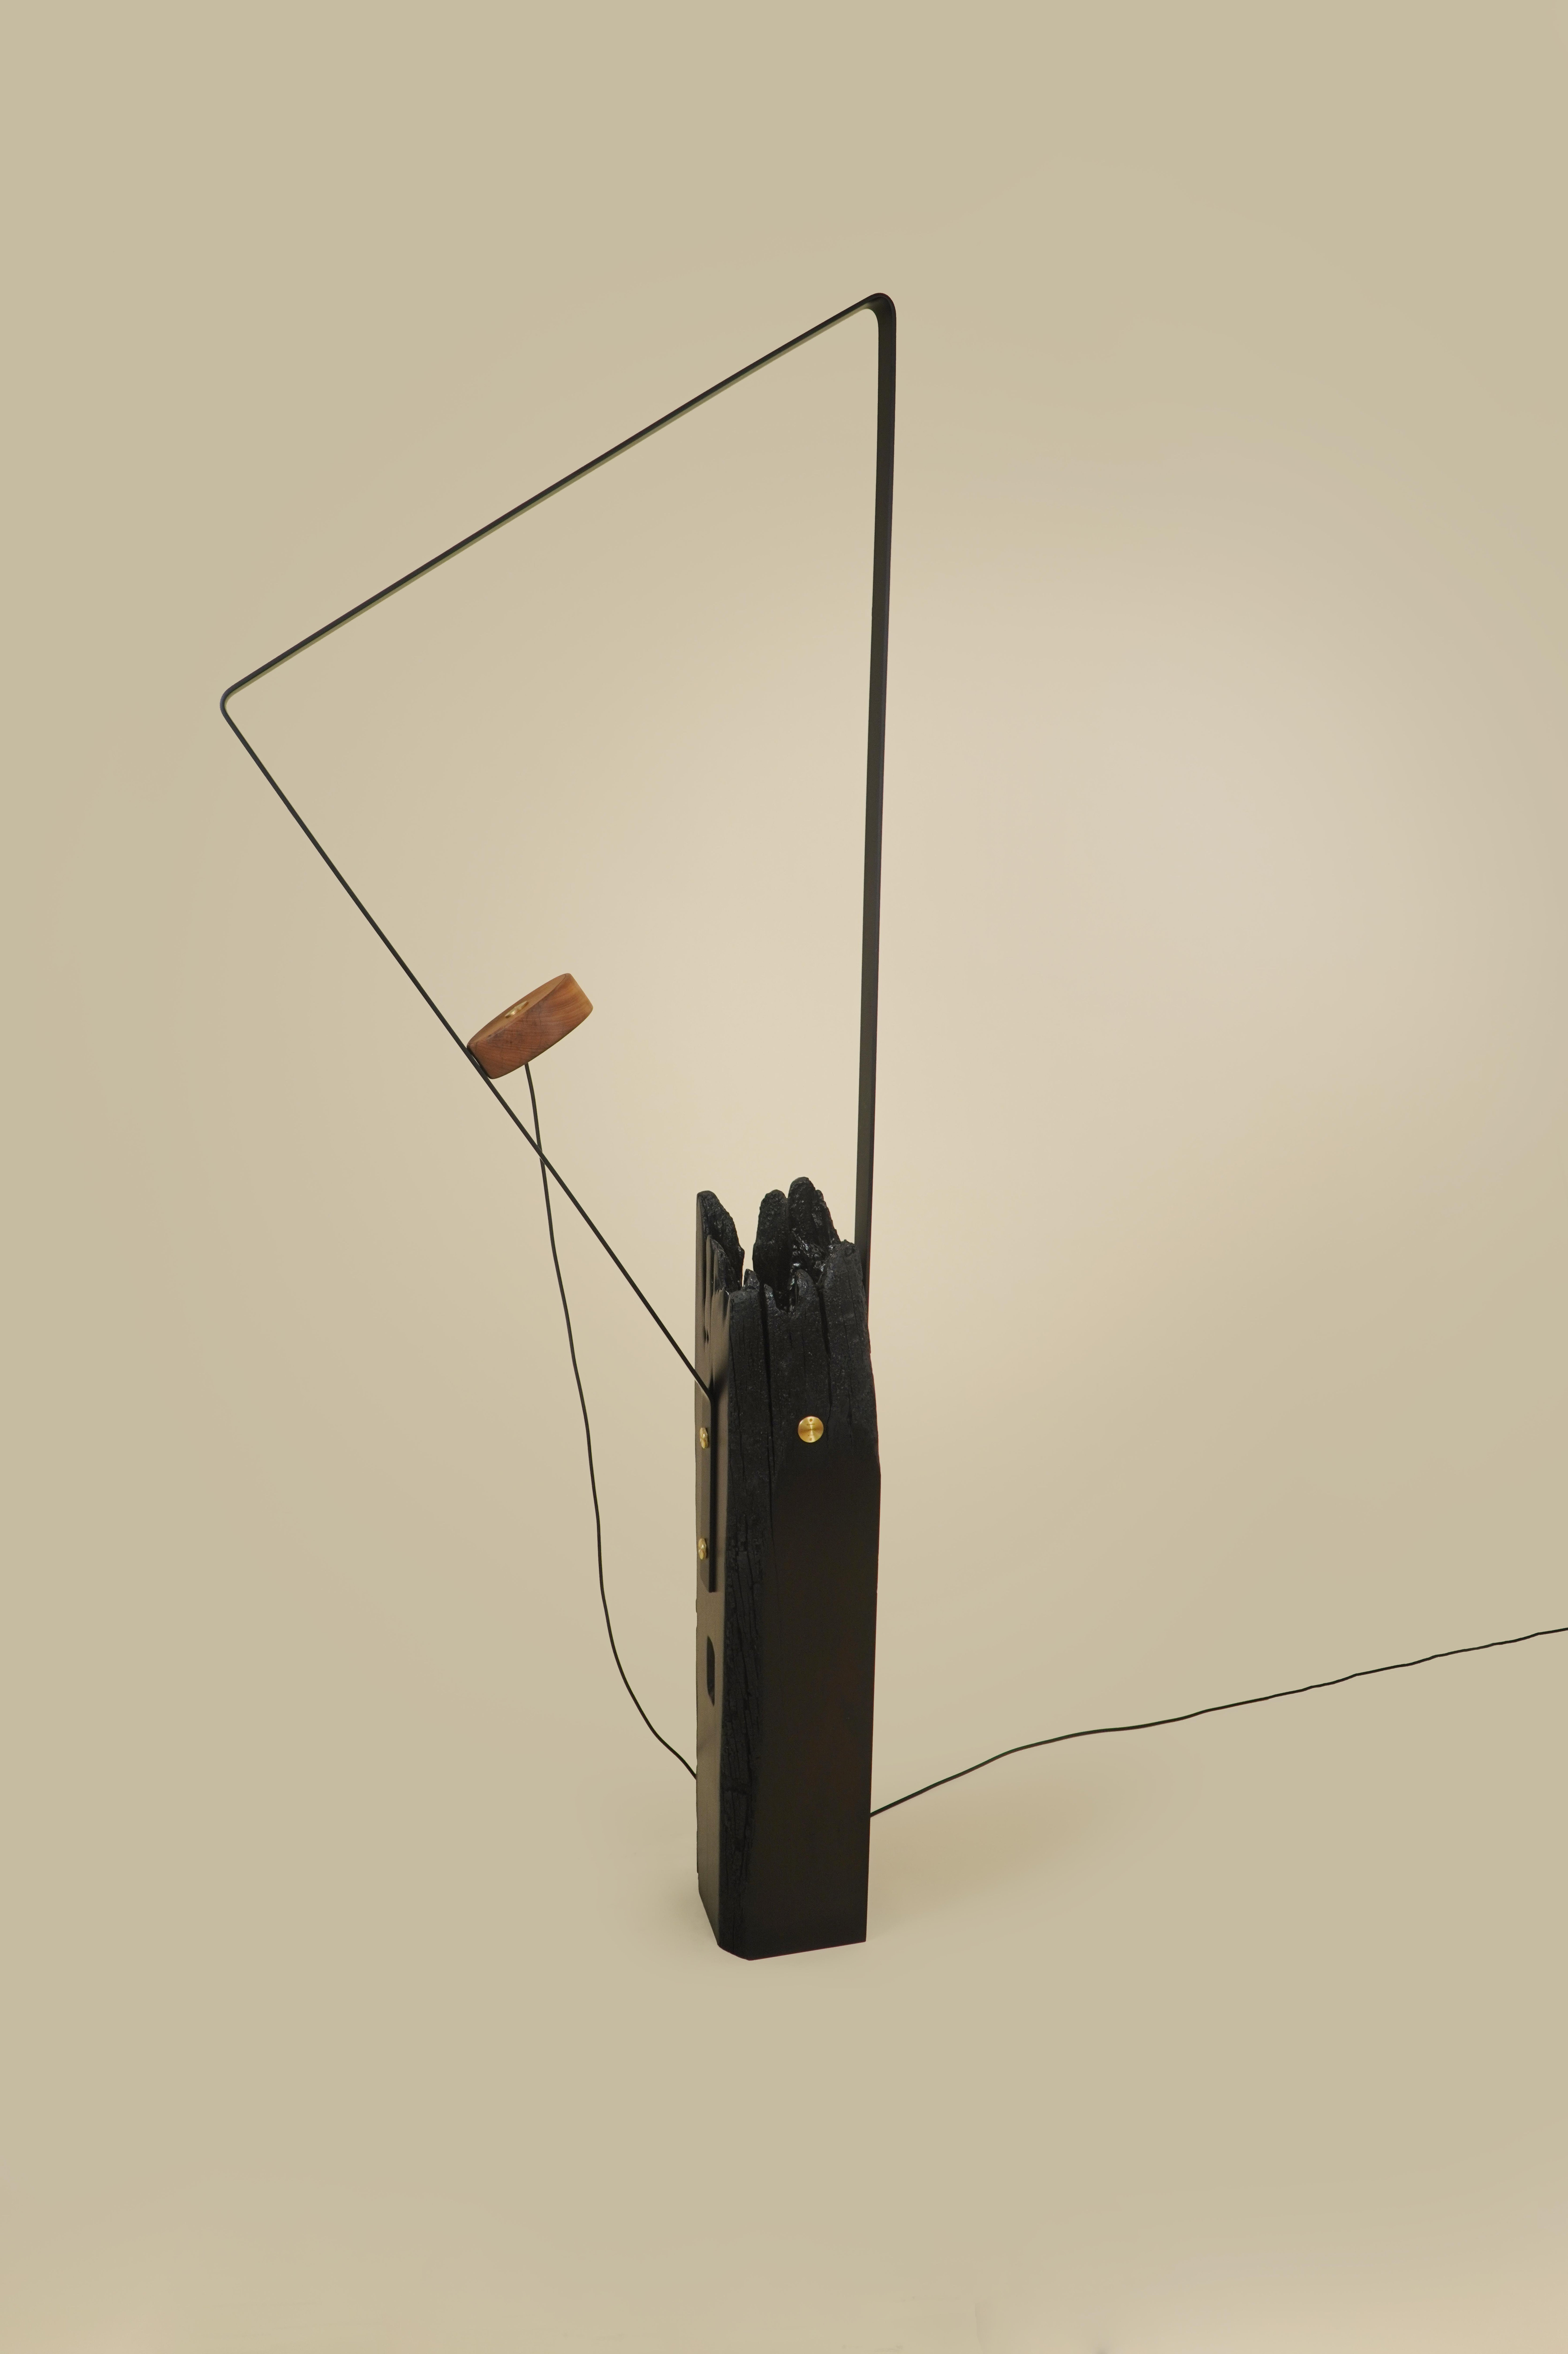 About the Lamp:

Esquadro is a Floor Lamp designed to enhance the beauty of its materials and tell the stories of its process. 

It has a strong LED panel of 9W being extremely useful for enlightening spaces also because it has magnets built in,